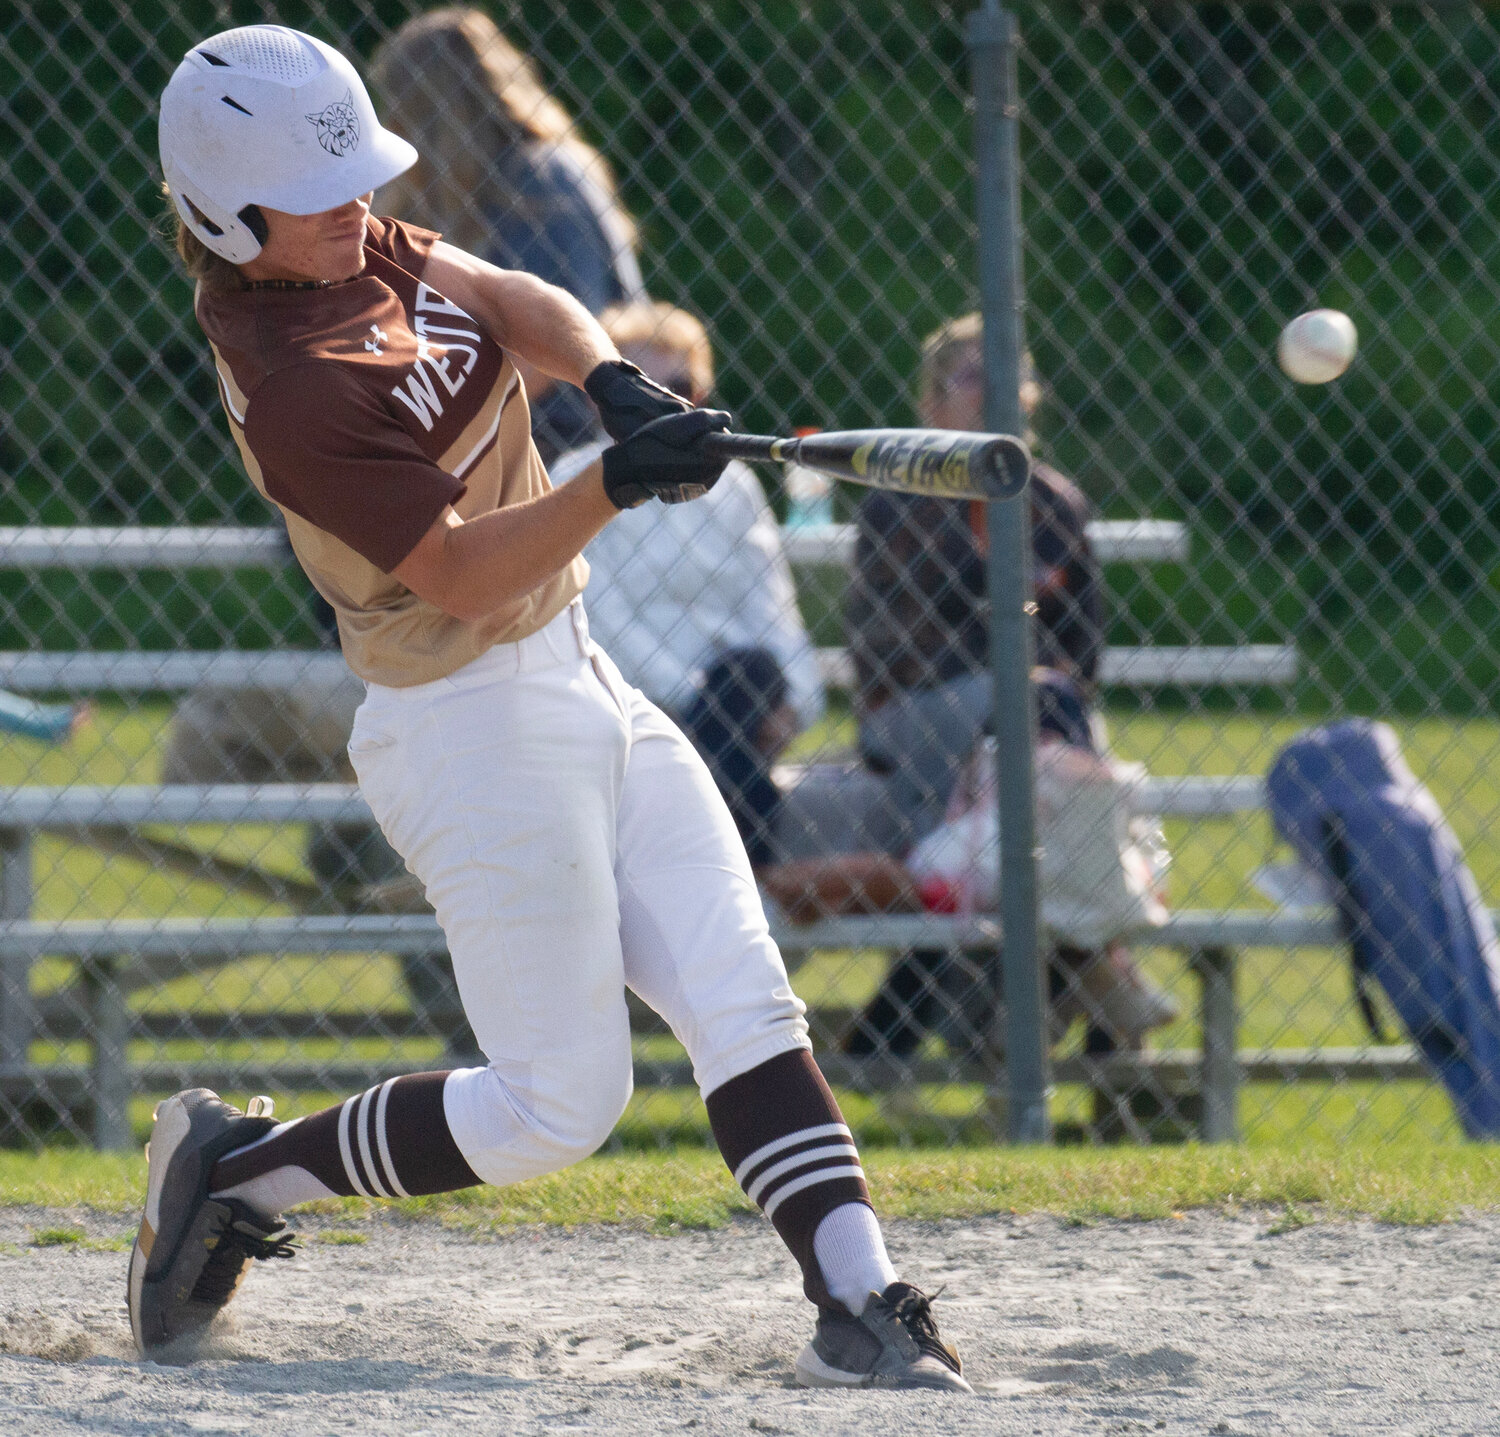 Noah Sowle played well defensively at shortstop and batted .325 from the leadoff spot and hammered 13 hits with 2 doubles, a triple, 5 RBI, 8 stolen bases and scored 18 runs.